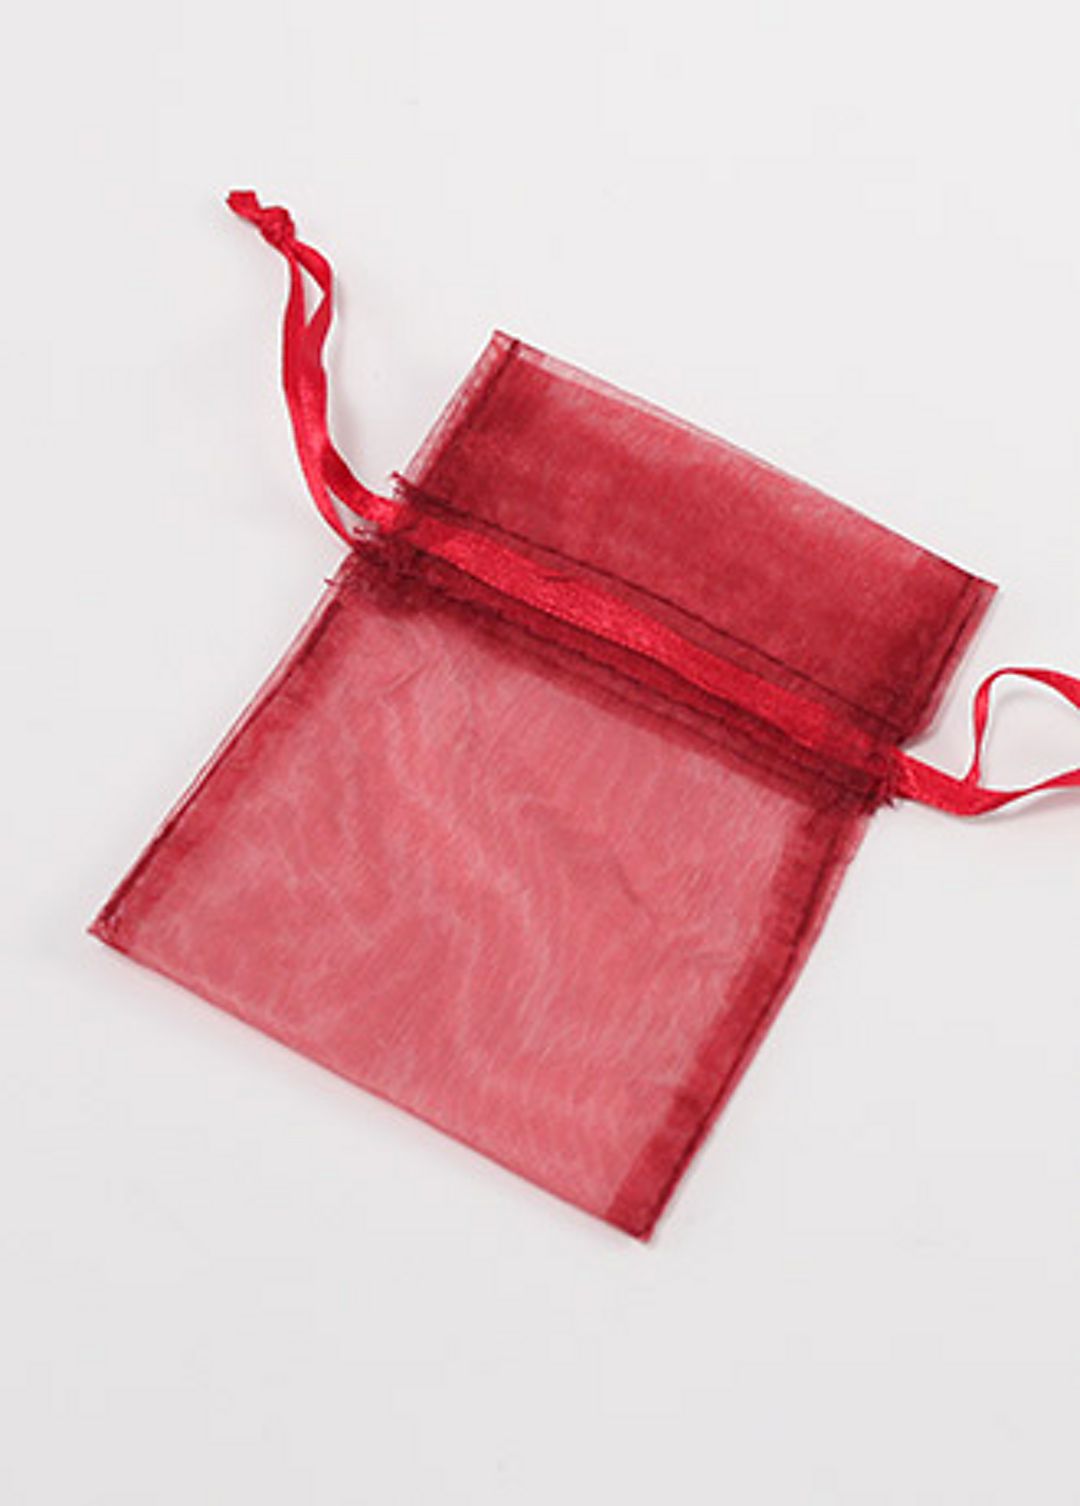 Small Sheer Organza Favor Bags Pack of 10 Image 1